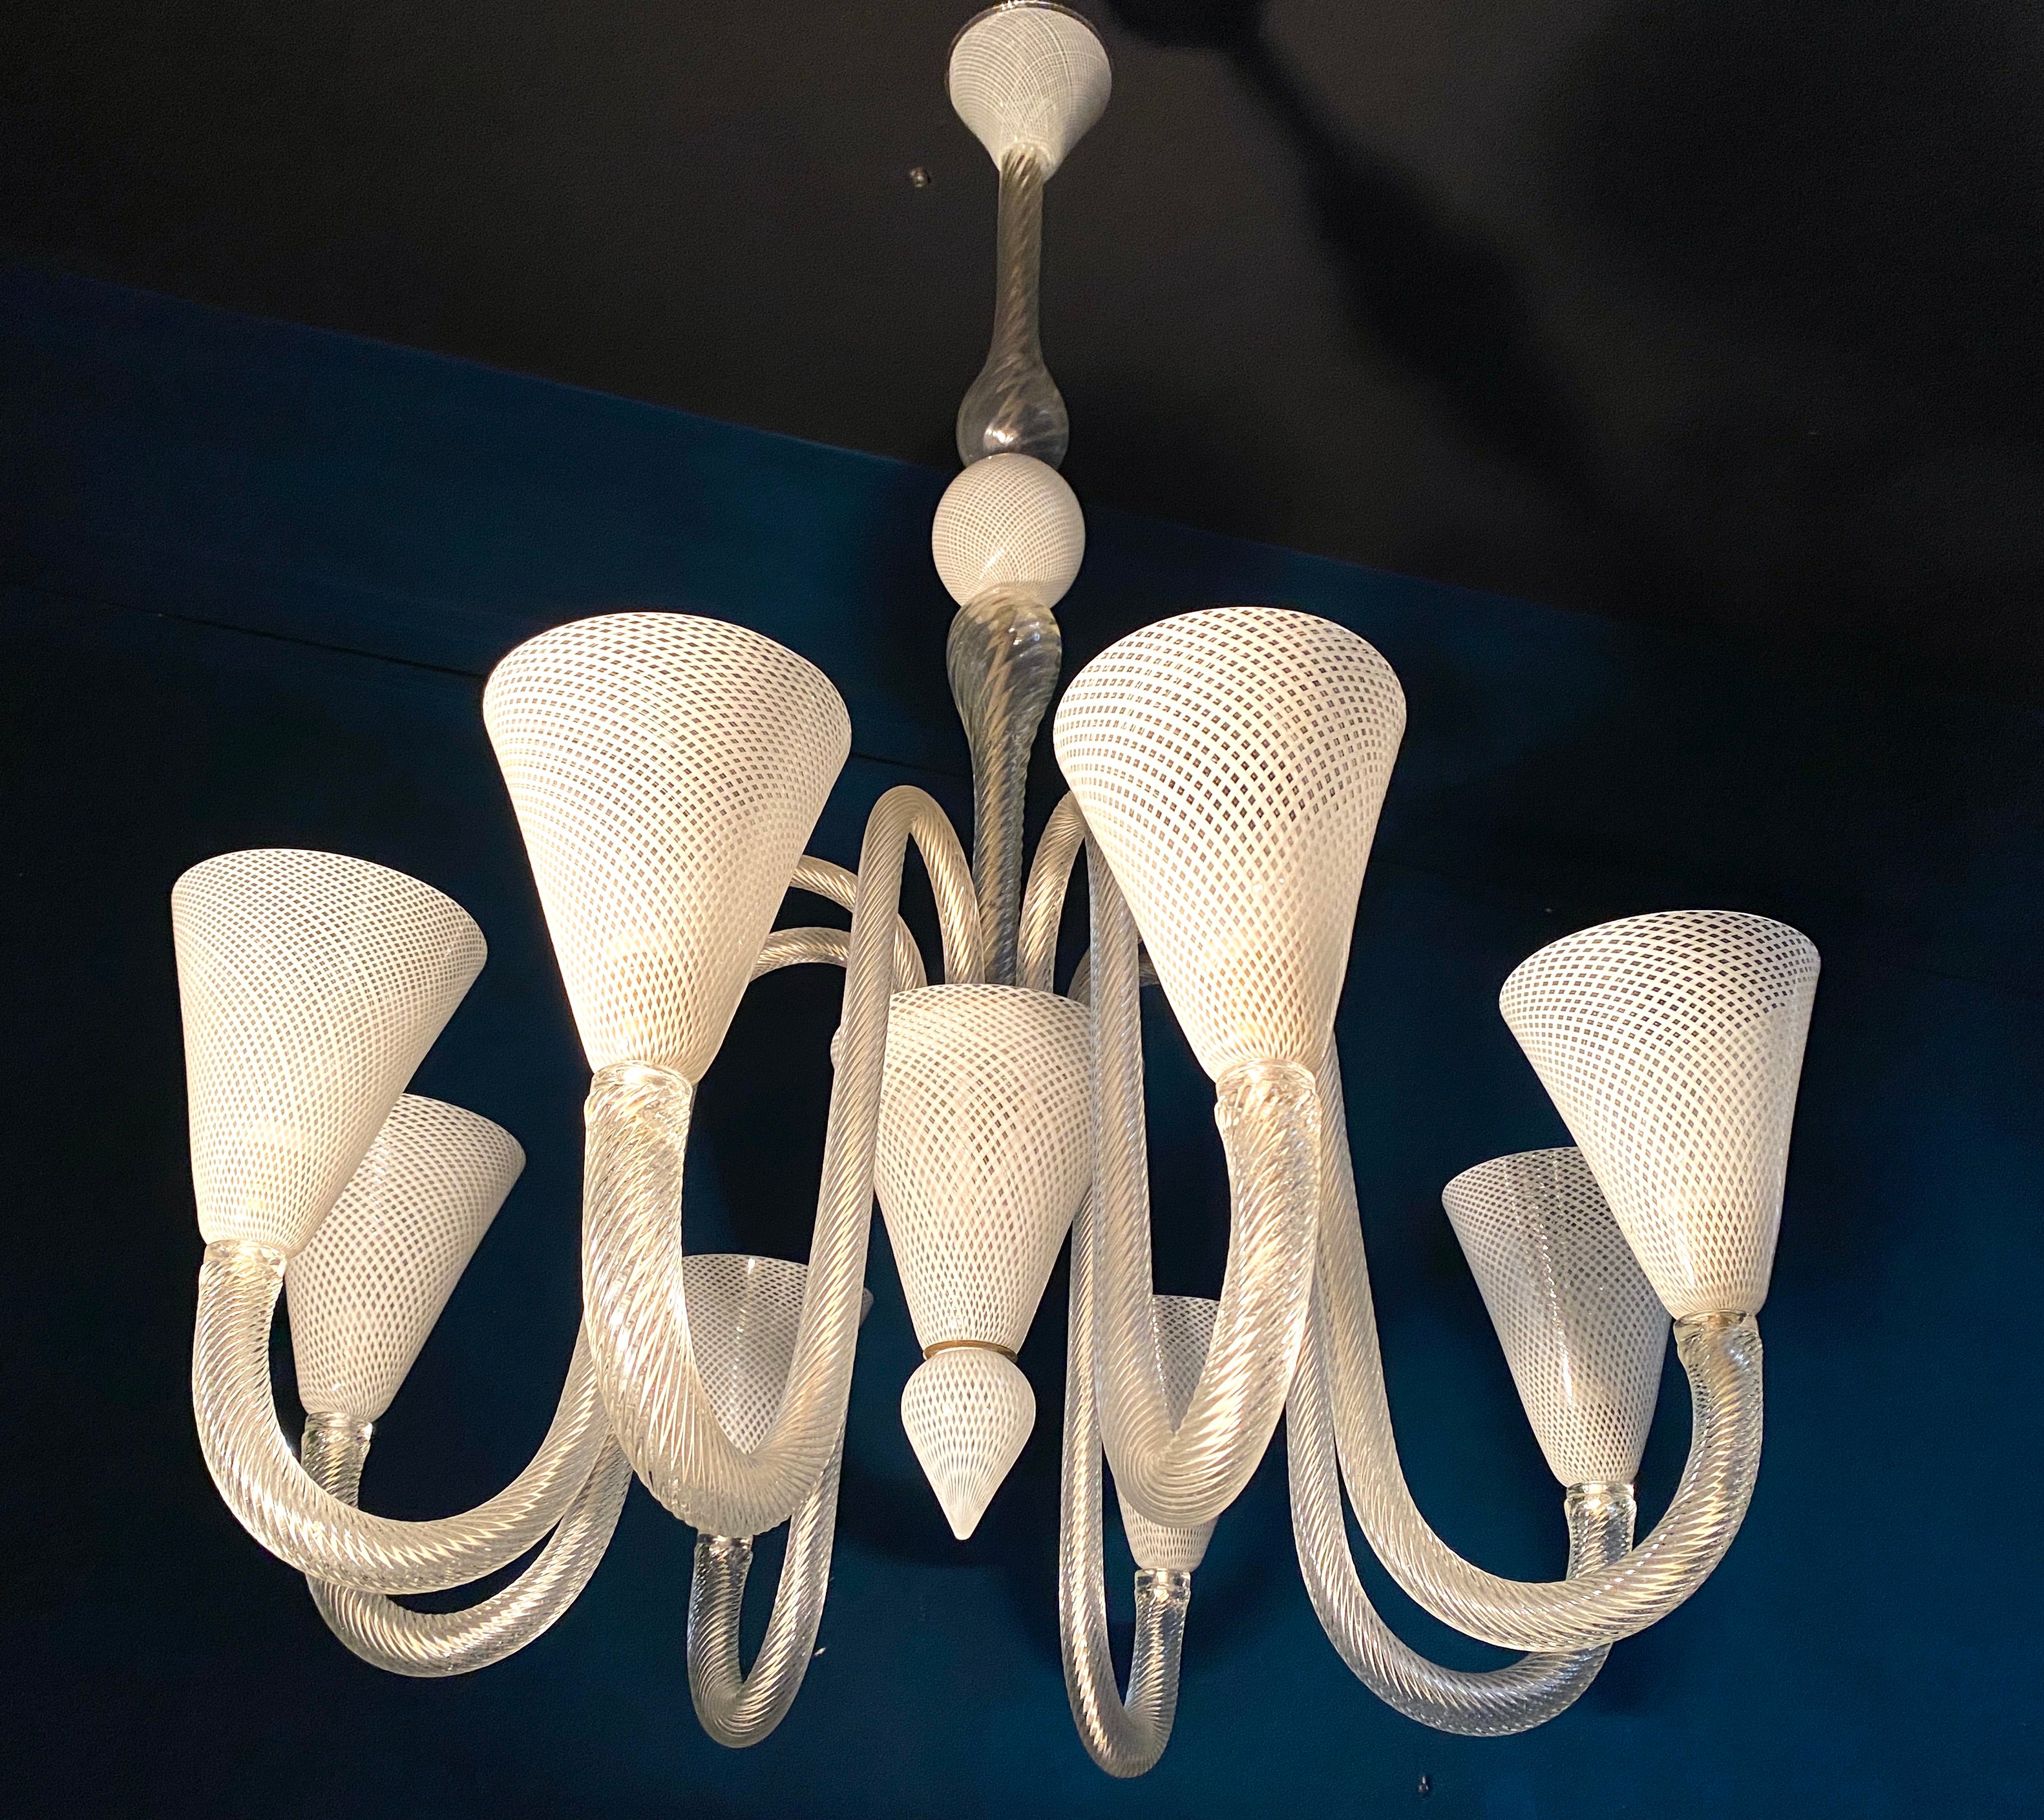 Elegant  Venini Art Deco hand blown reticello Murano chandelier with six arms. 
 
Six  E 27 light bulbs. We can rewire for your country standards.
Cleaned and re-wired, in full working order and ready to use. In excellent vintage condition. The